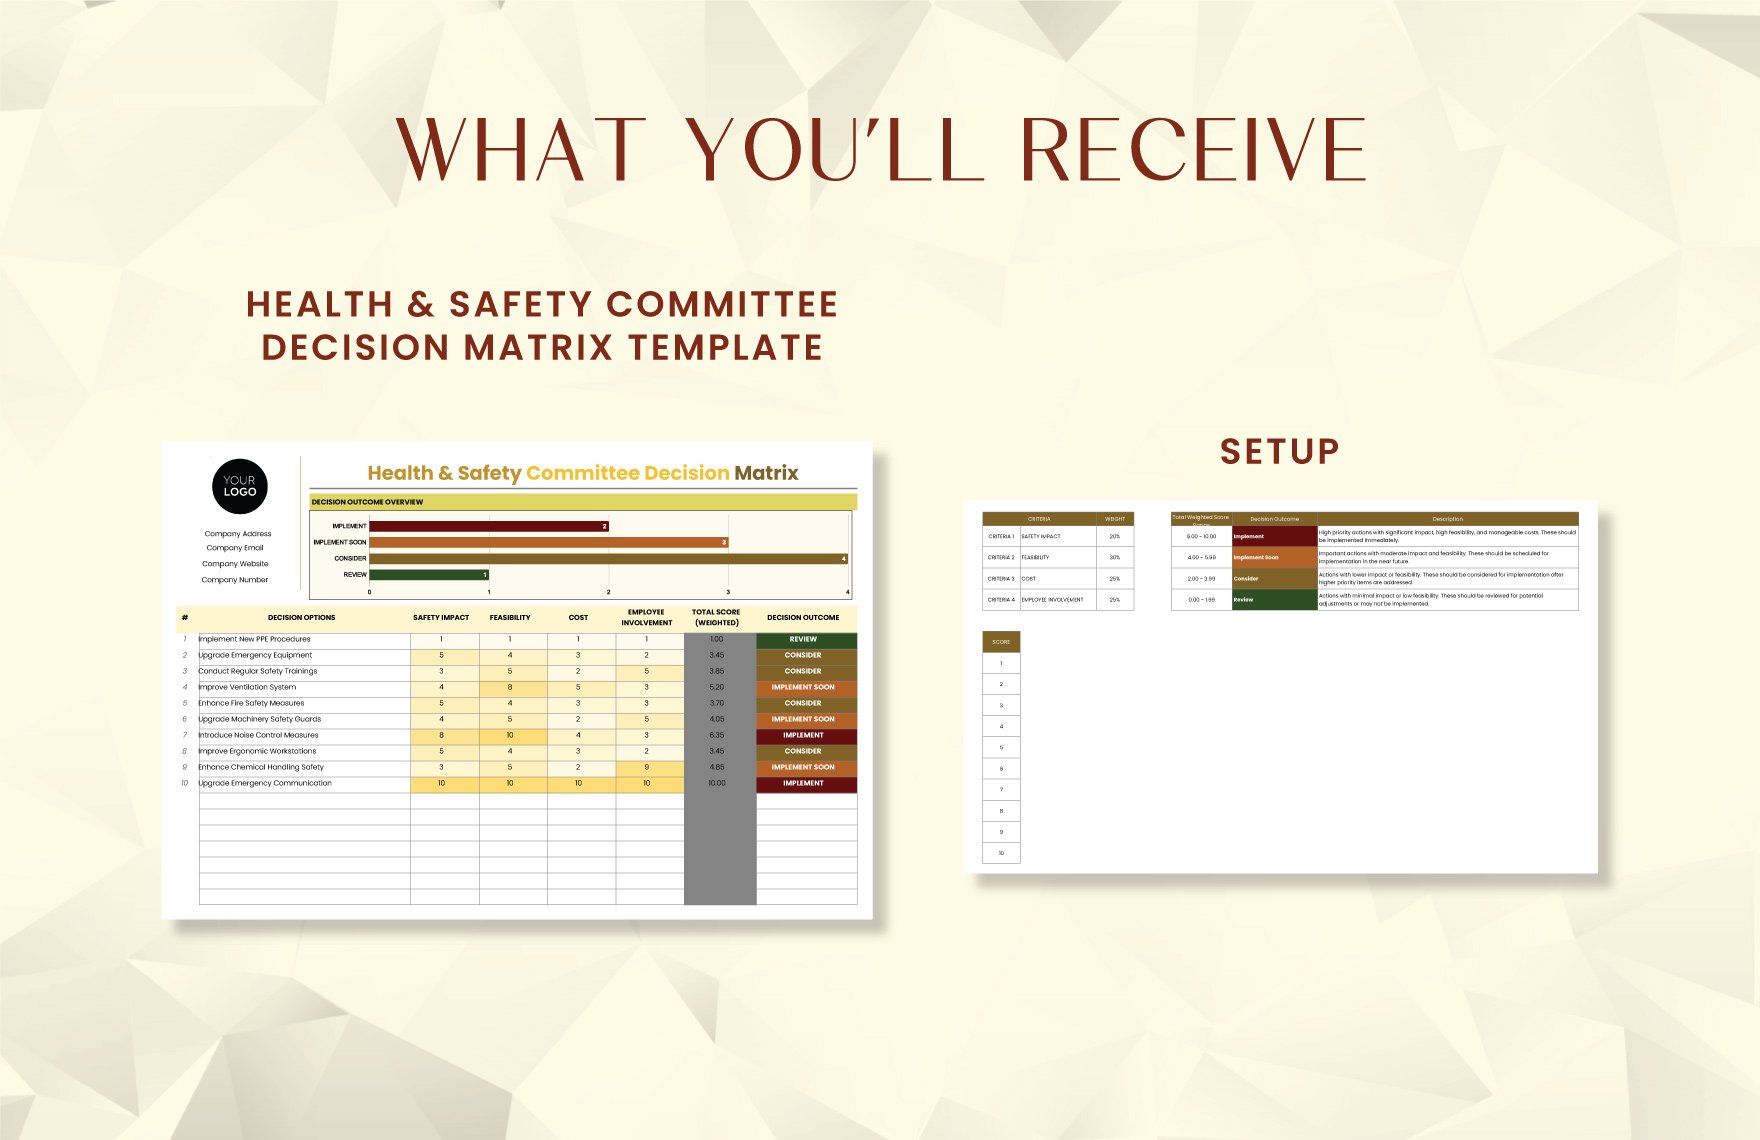 Health & Safety Committee Decision Matrix Template